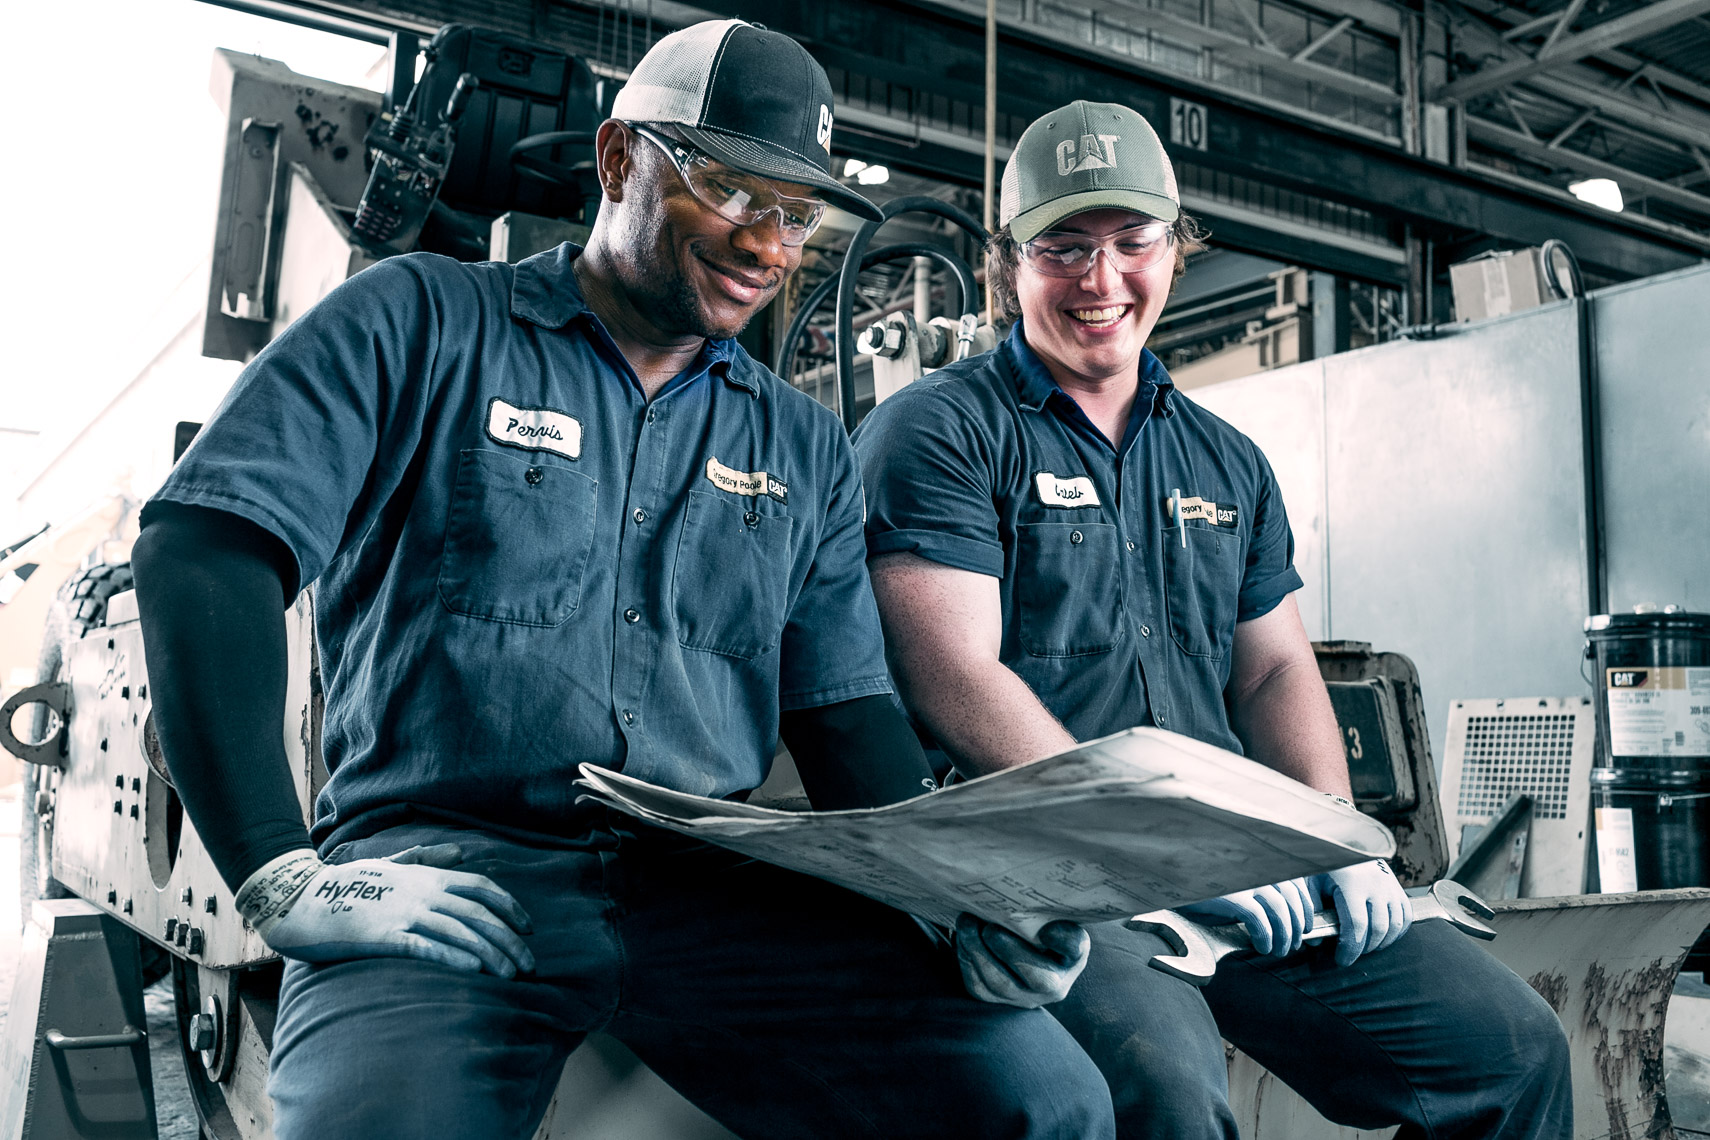 Service_Technicians_for_Gregory_Poole_20190904_photo_by_Justin_Kase_Conder_2334-Edit_CAT.JPG